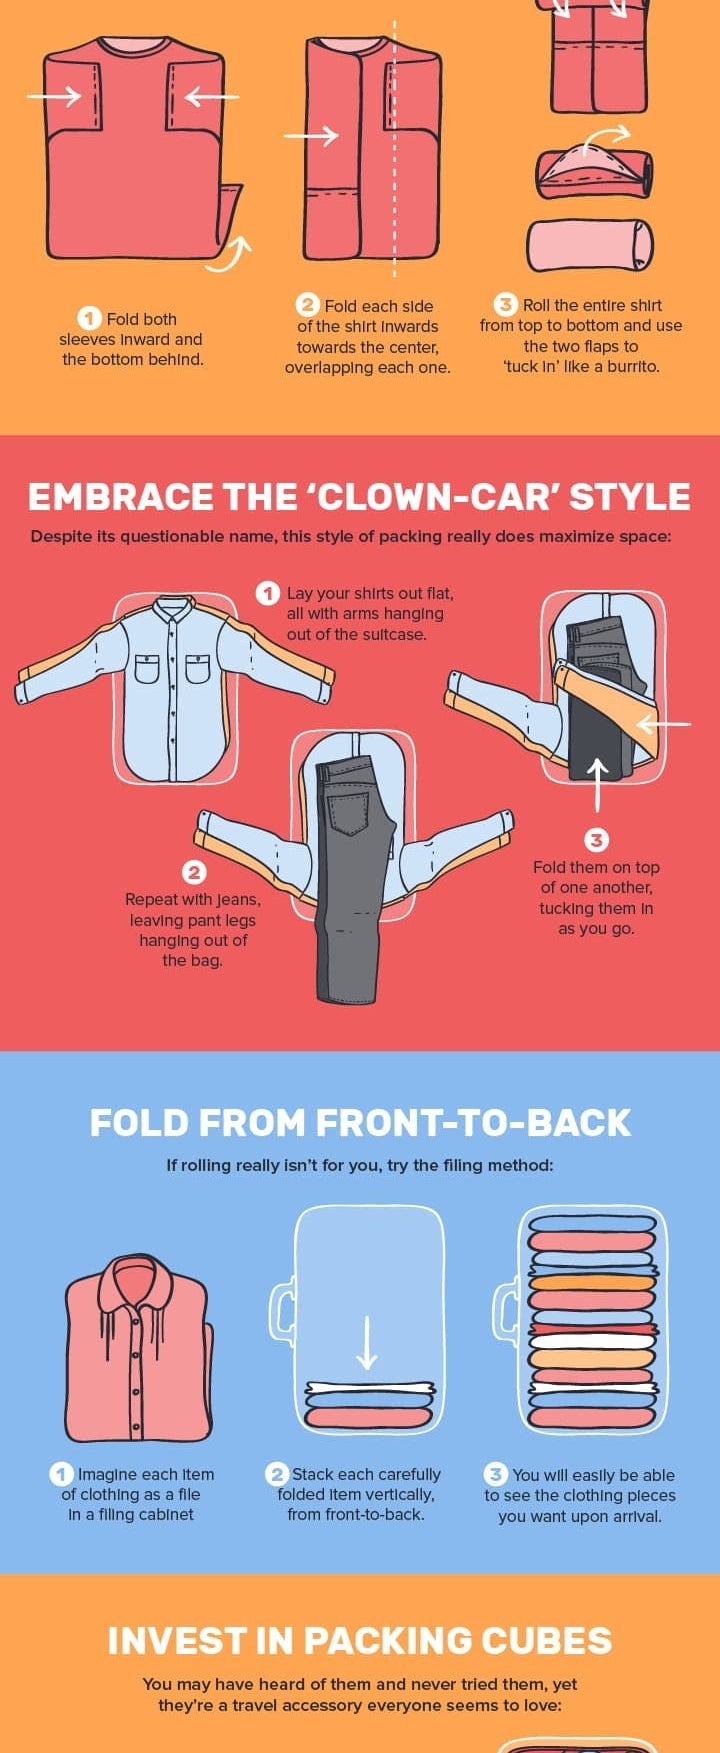 An infographic of different folding methods